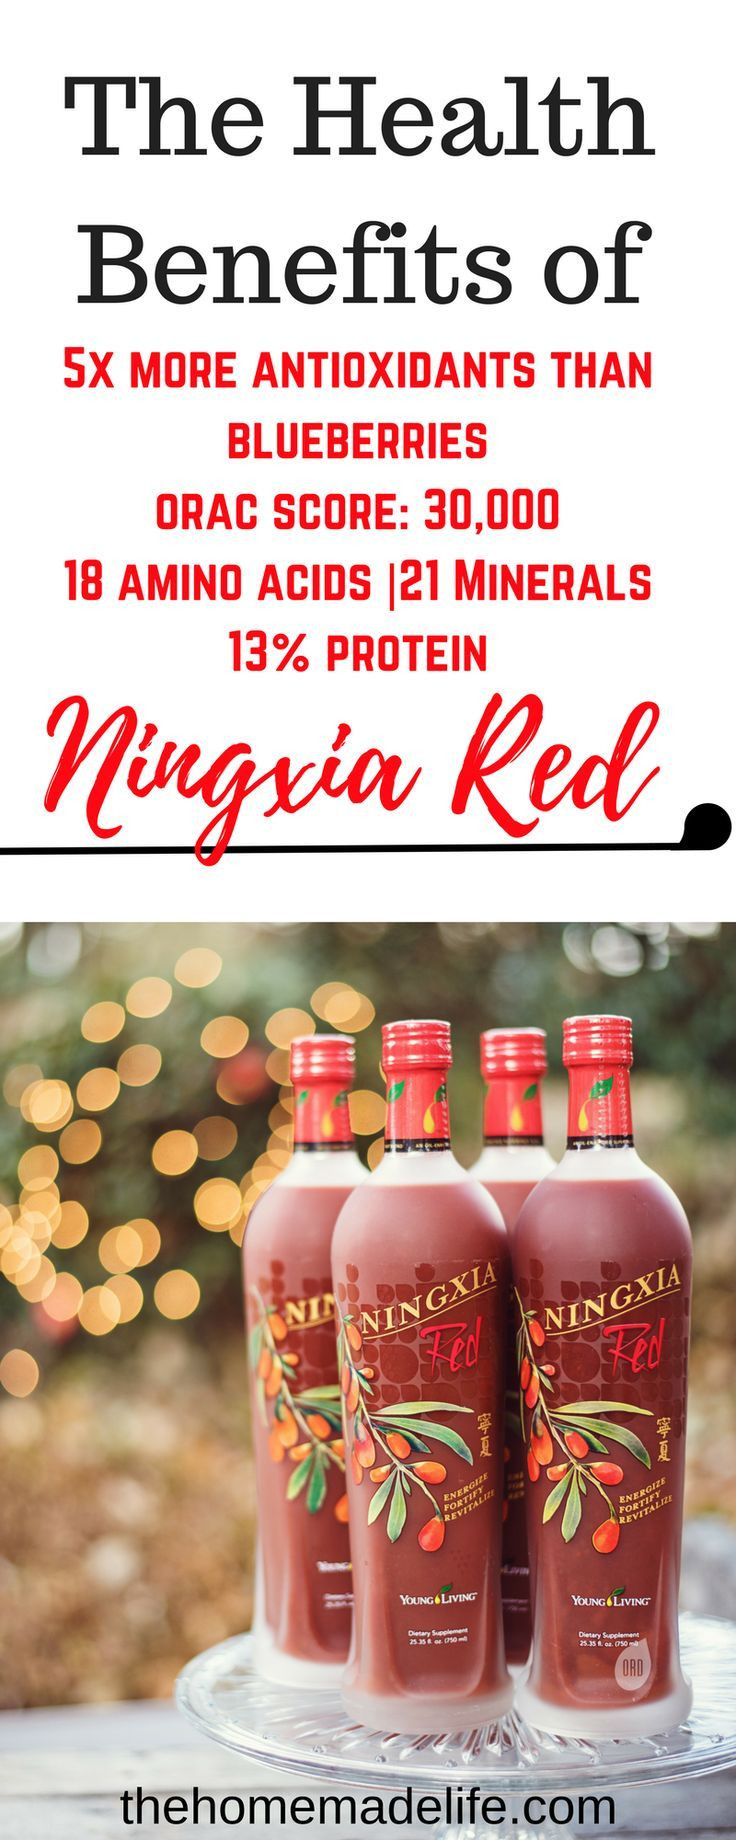 Young Living Weight Loss Supplements
 Ningxia Red Health Benefits